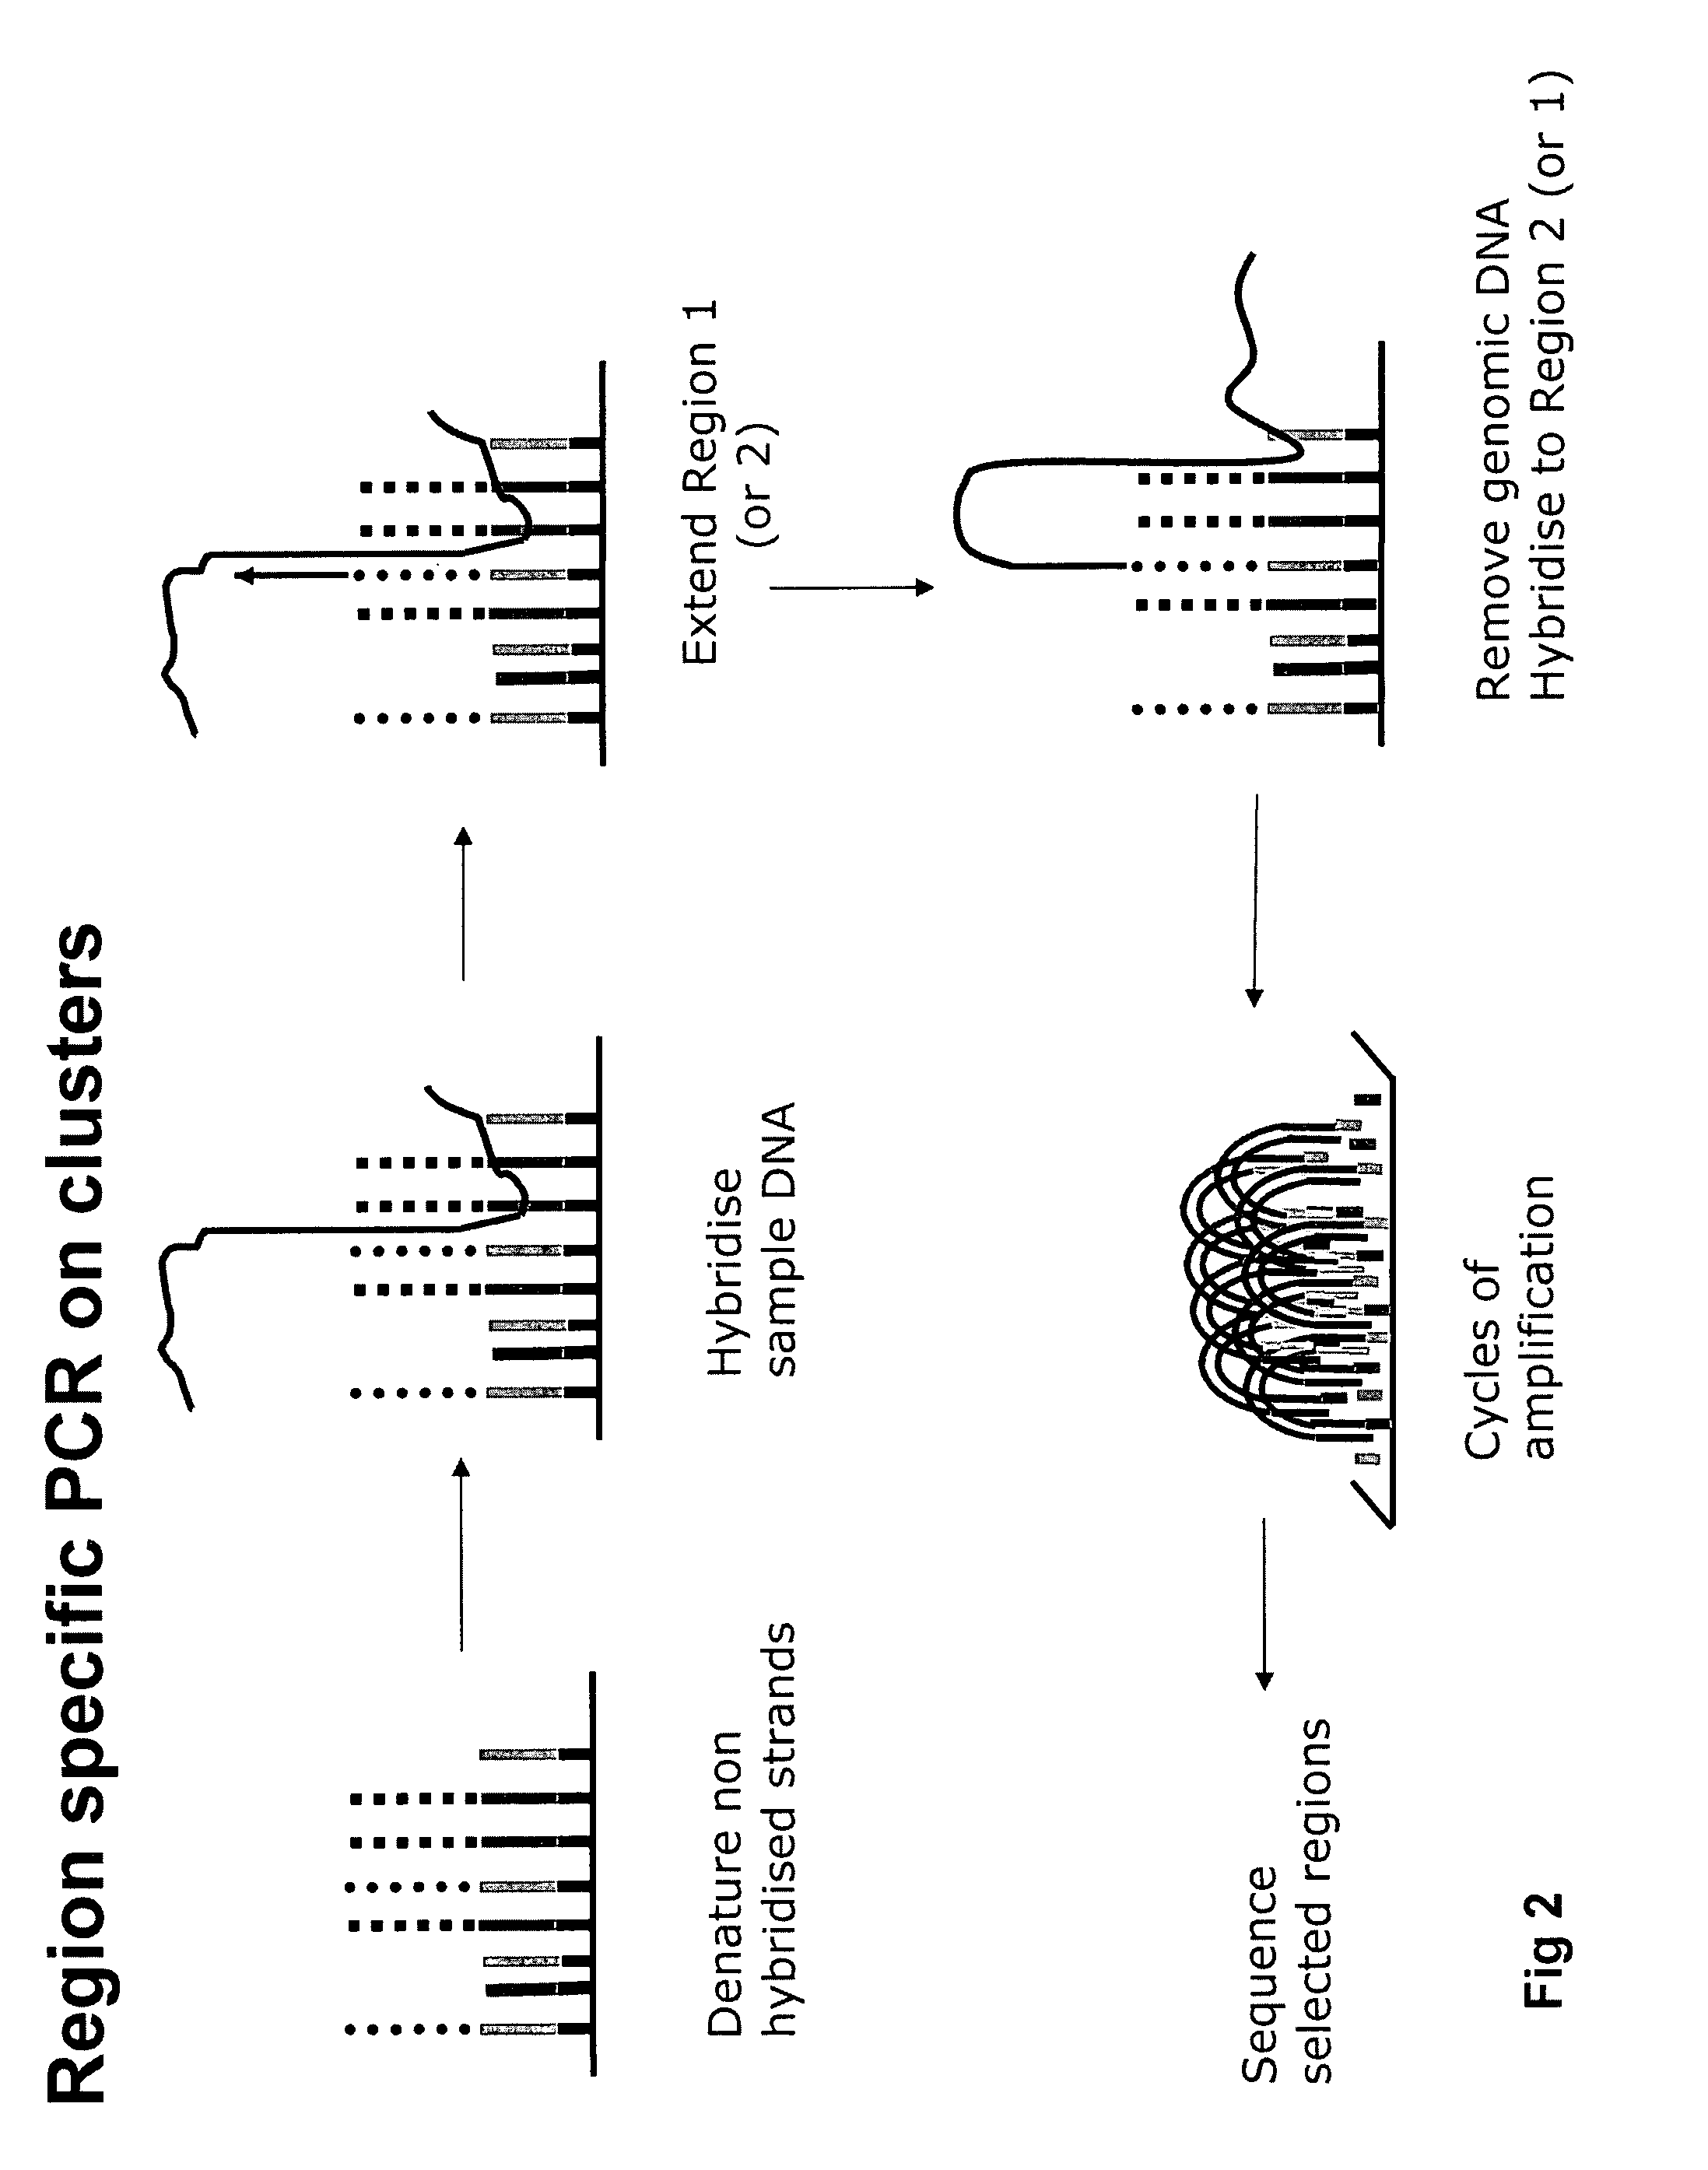 Nucleic acid sample enrichment for sequencing applications